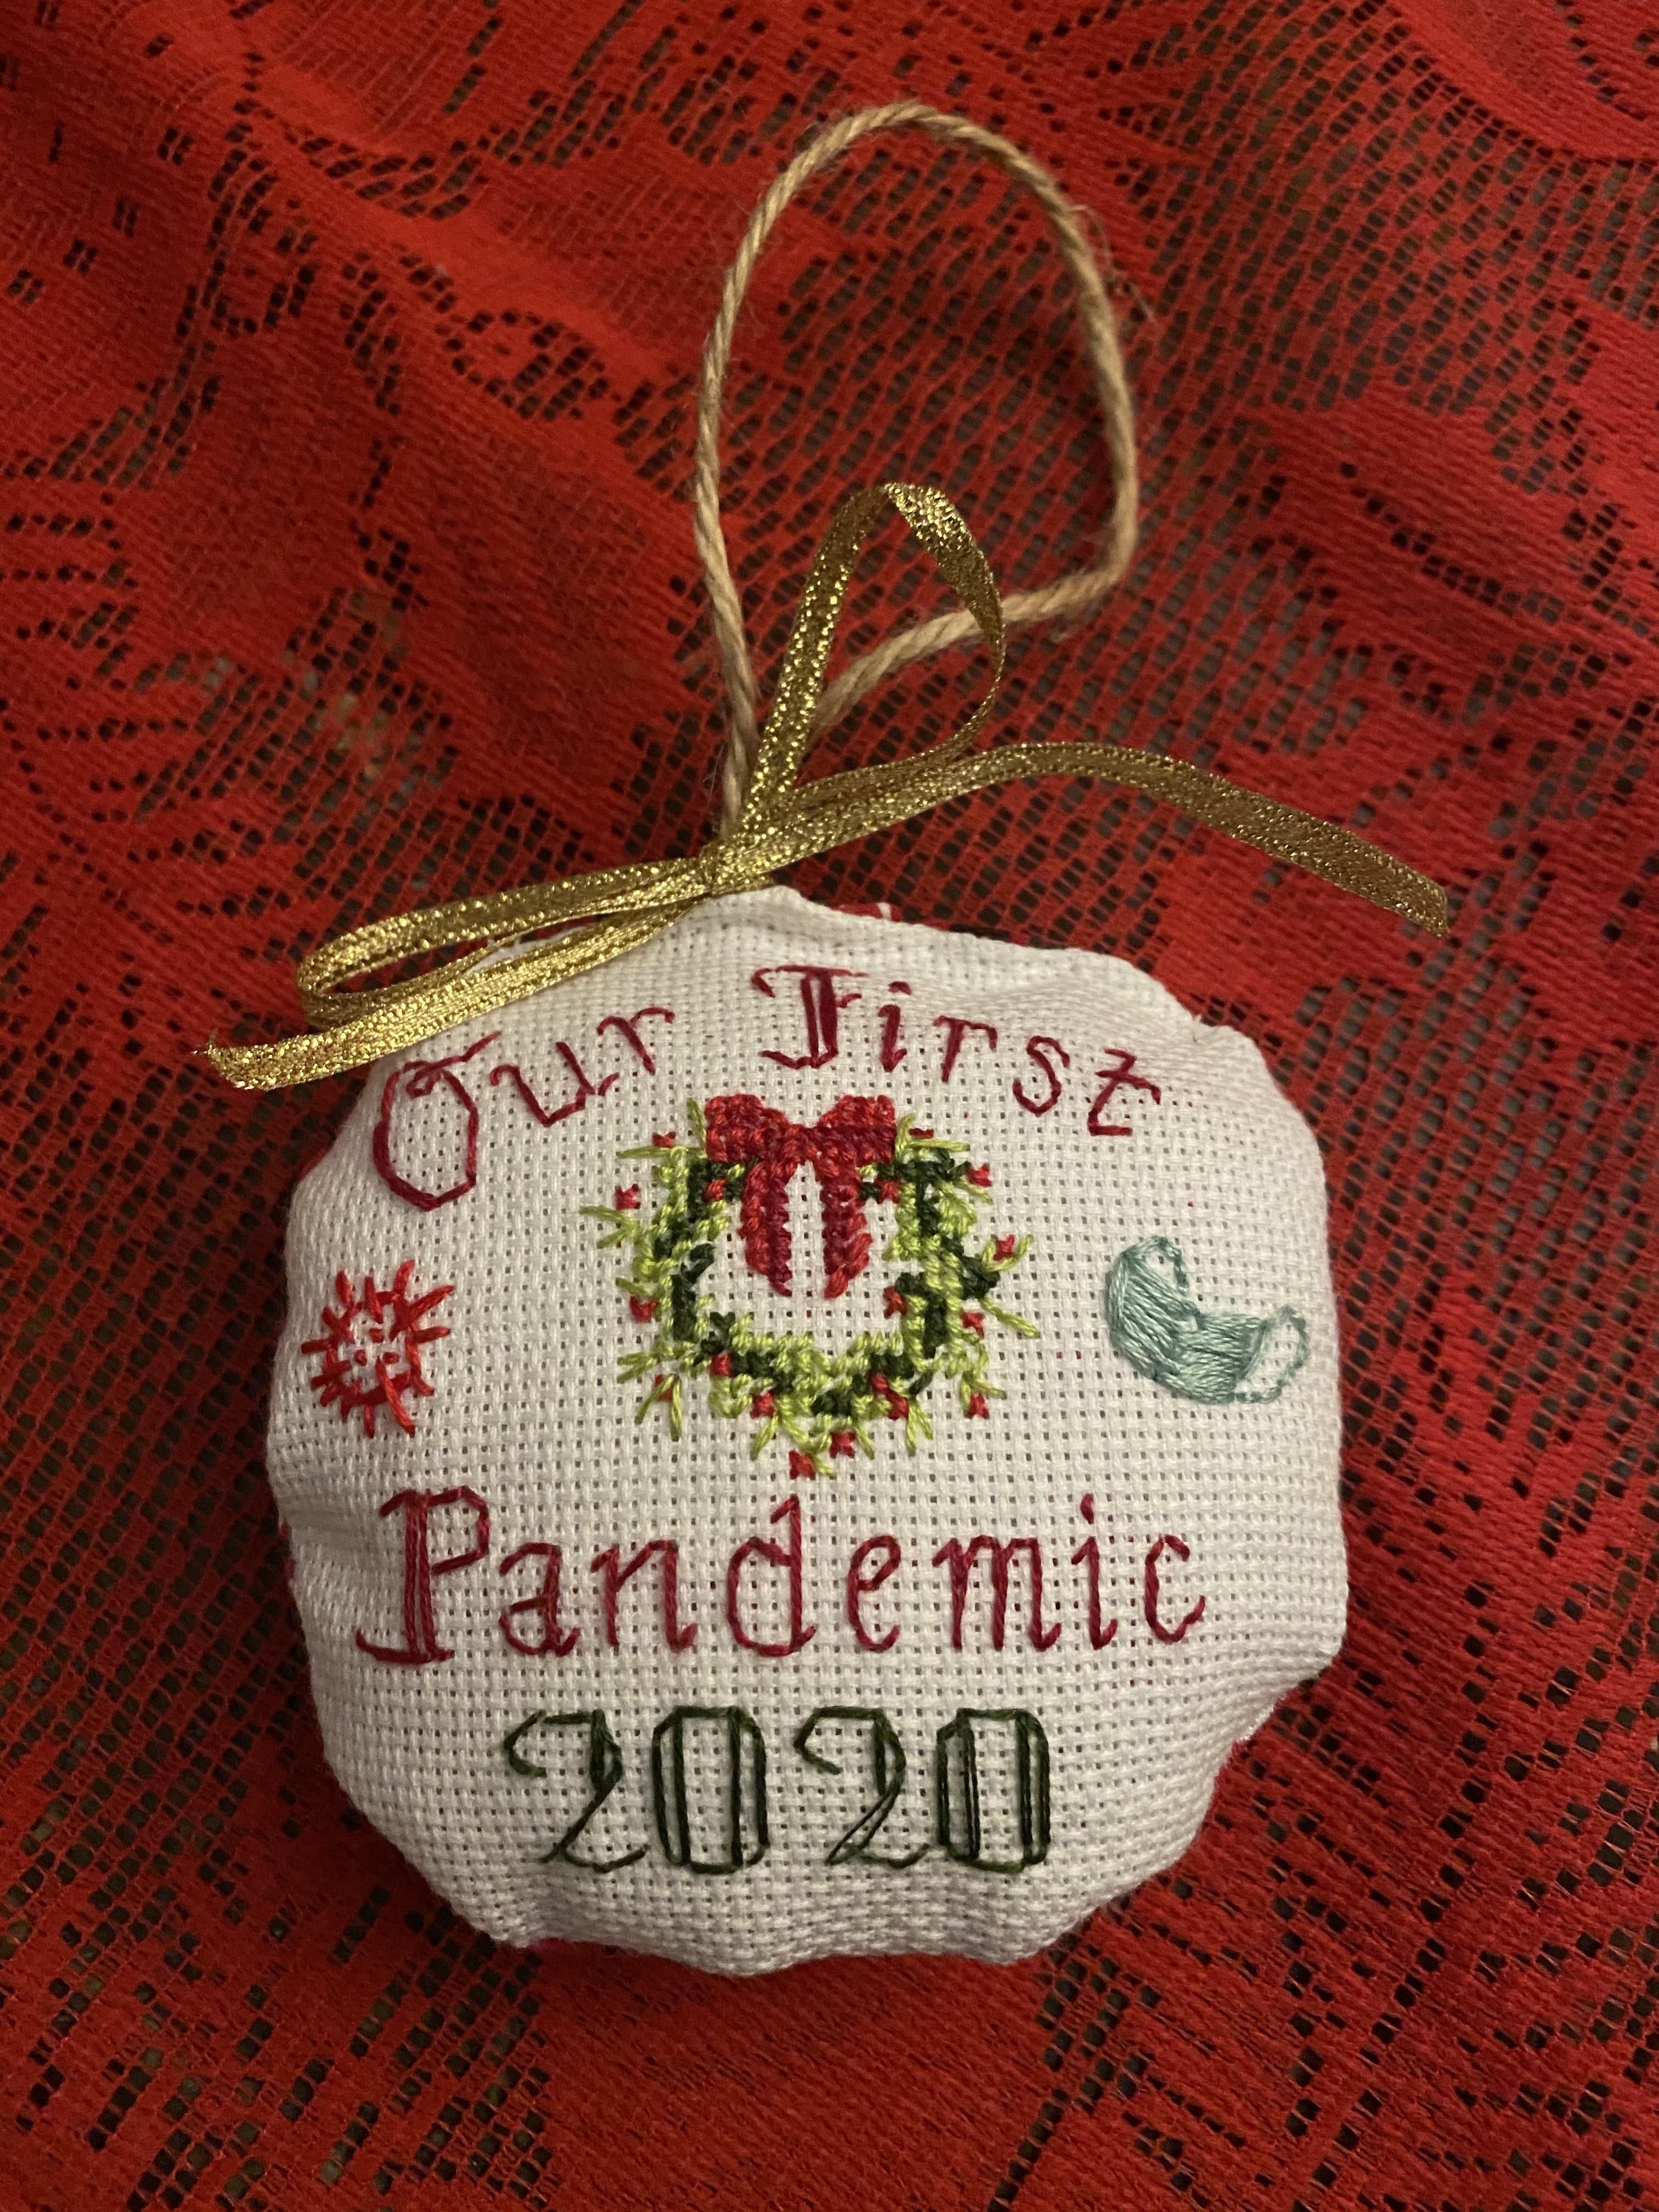 Made a commemorative ornament for my husband. We’ve survived 9 mos of lockdown in a one bedroom apartment!